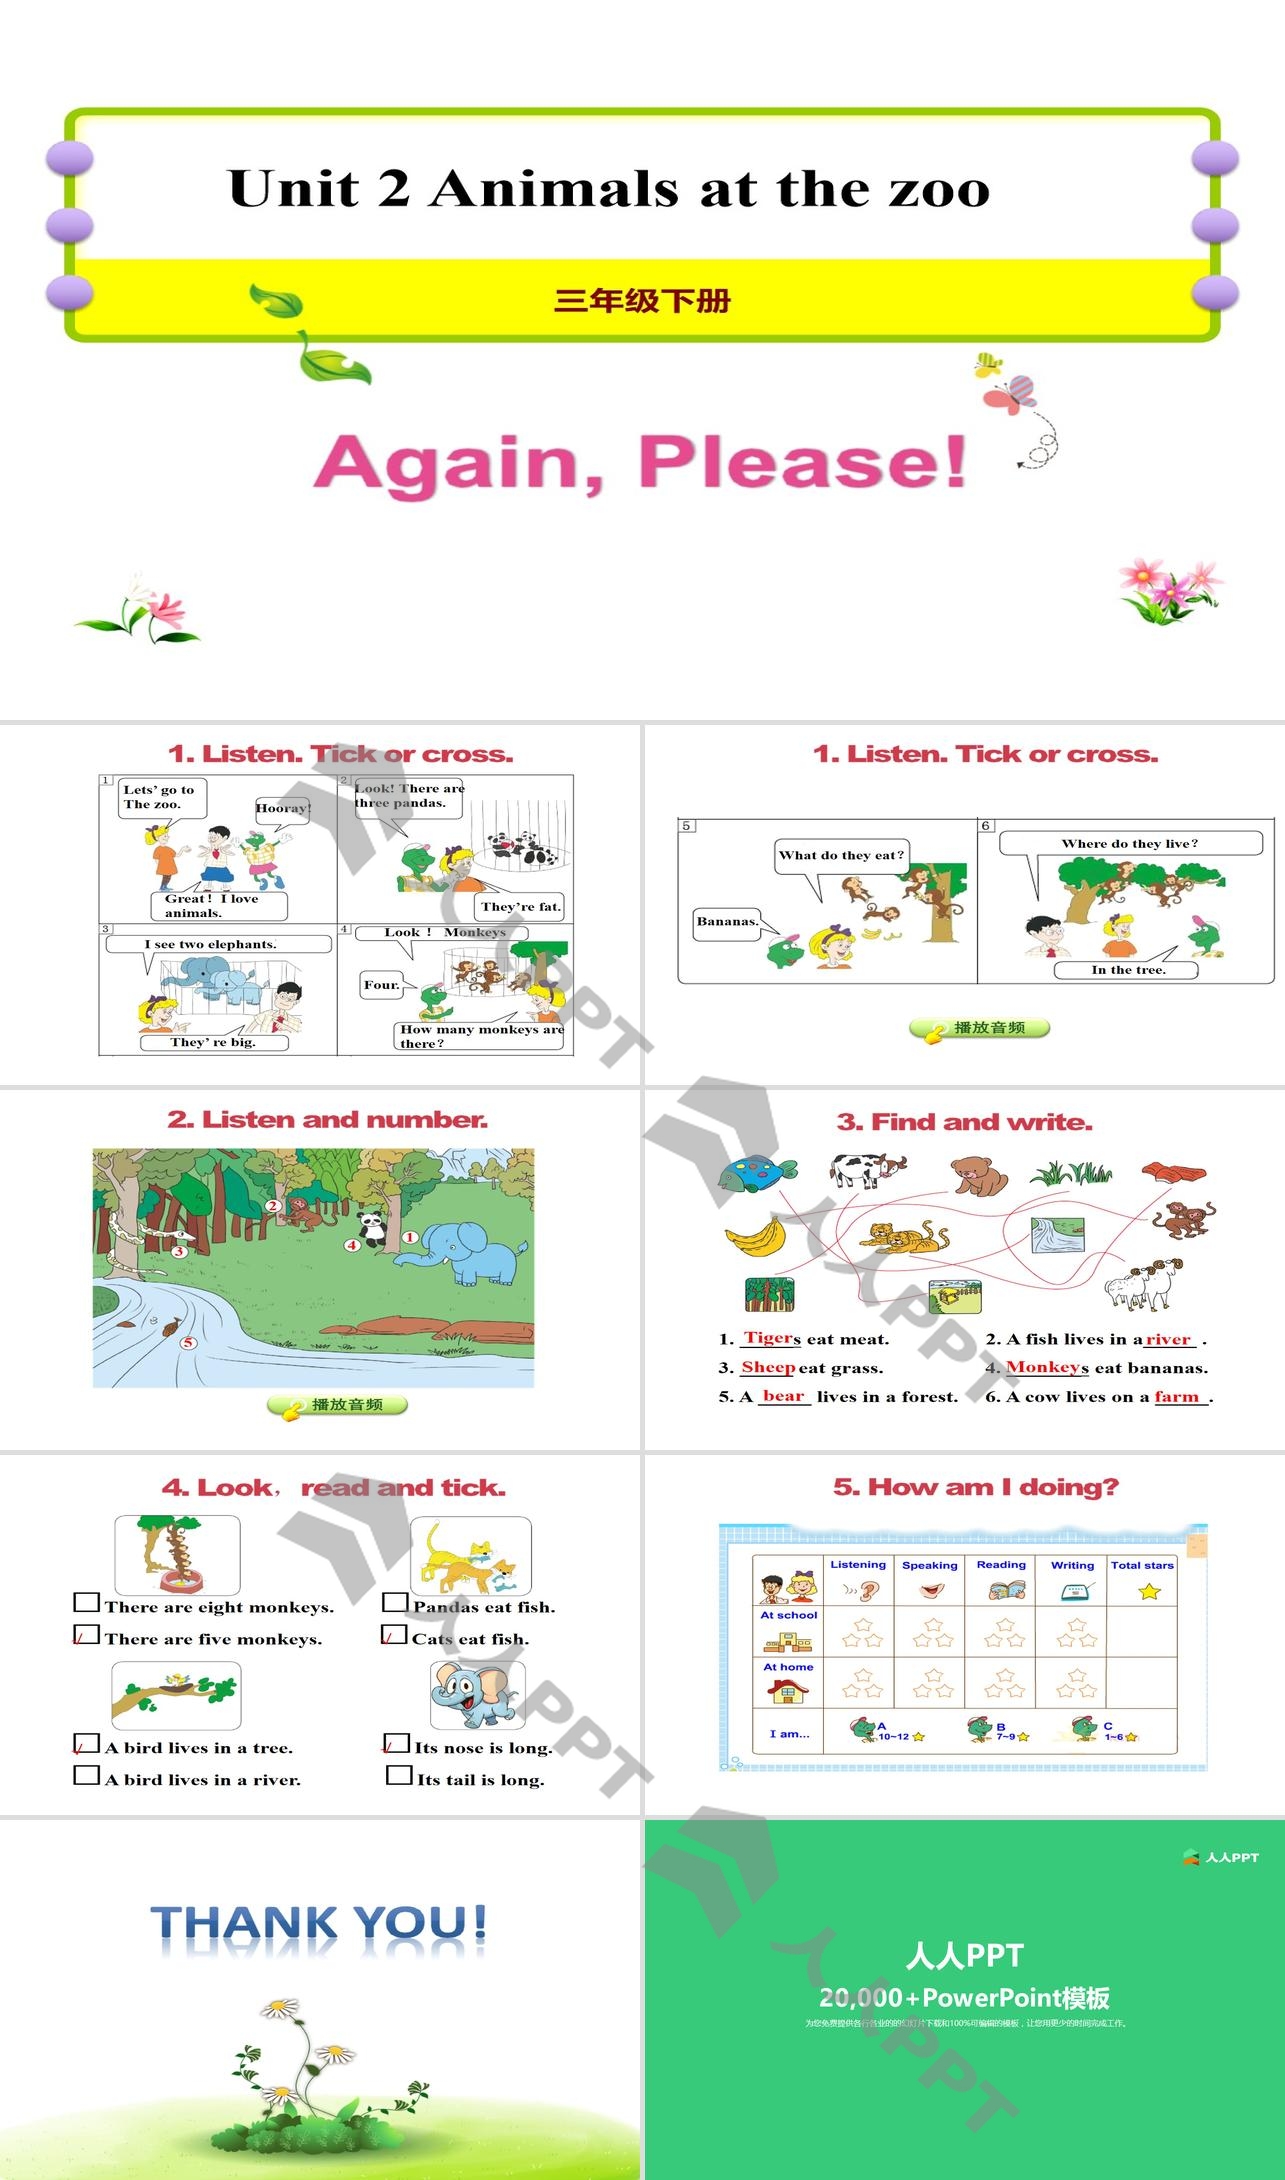 《Again,Please!》Animals at the zoo PPT长图